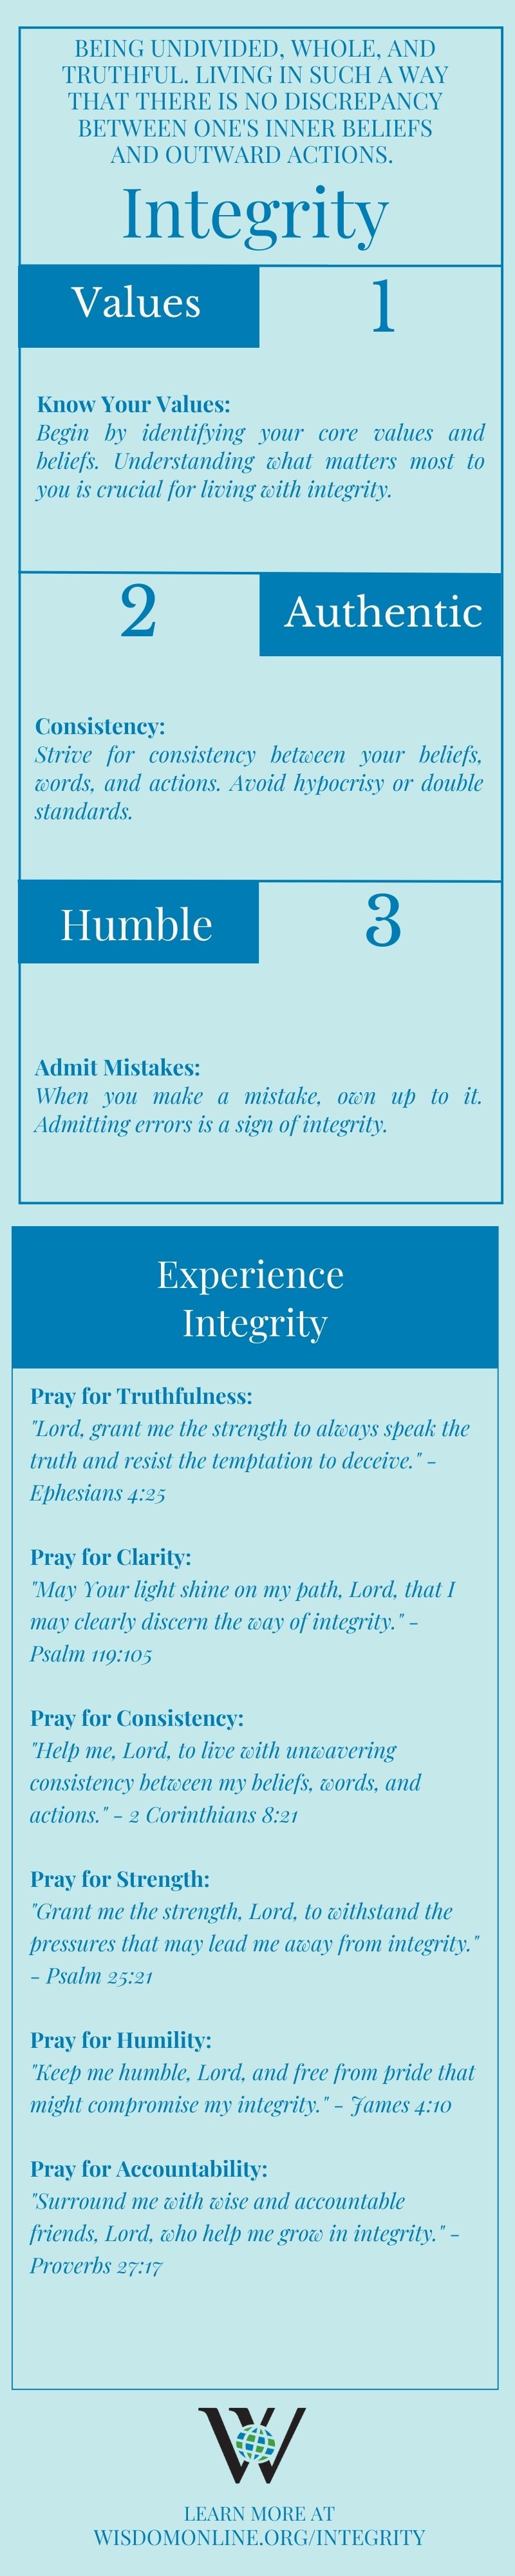 Infographic on the biblical quality of integrity.